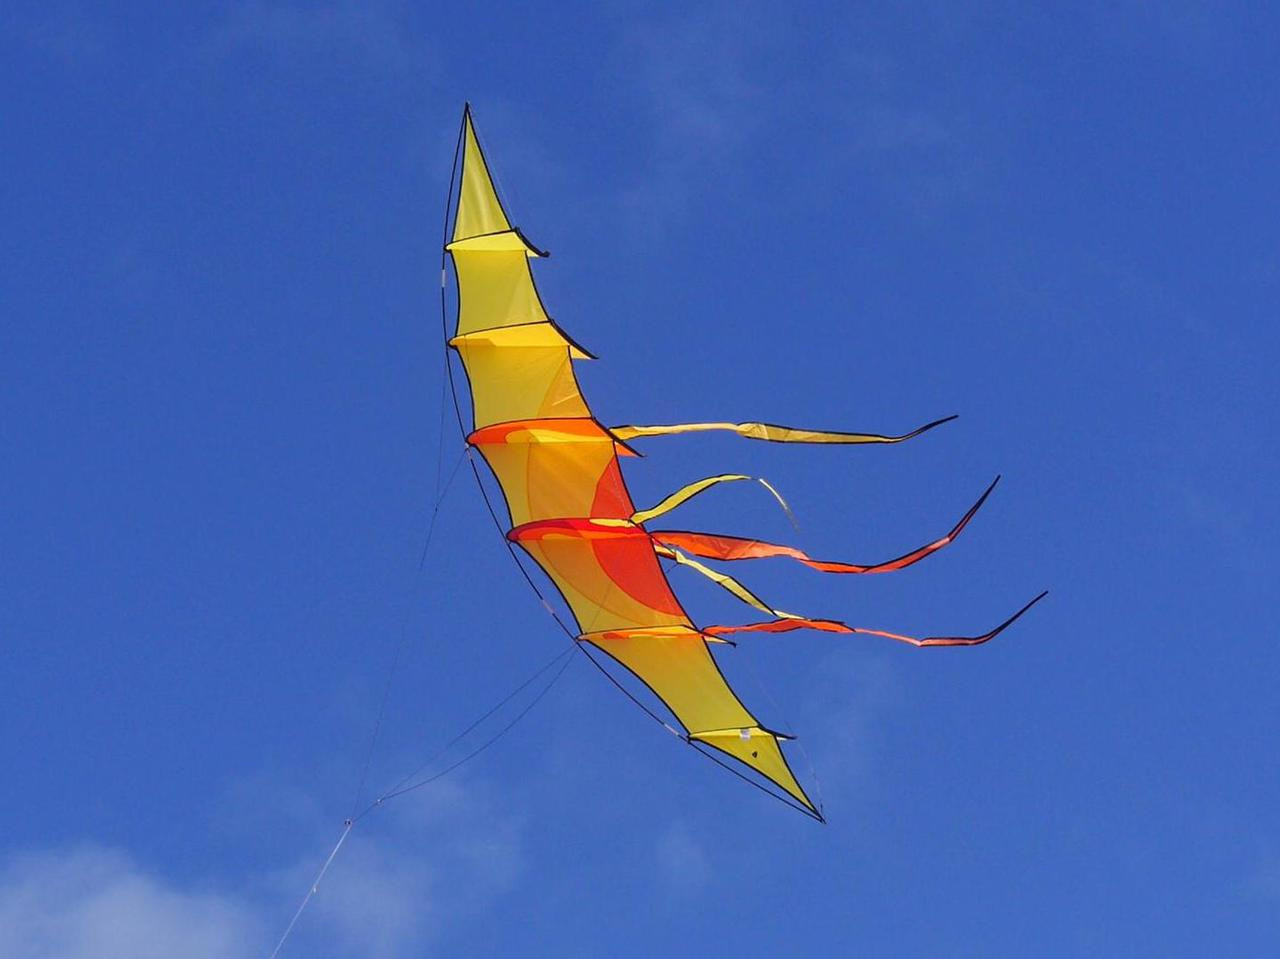  Tigress Kite Kit with Clips, 2 Wind-on Swivels, and 1